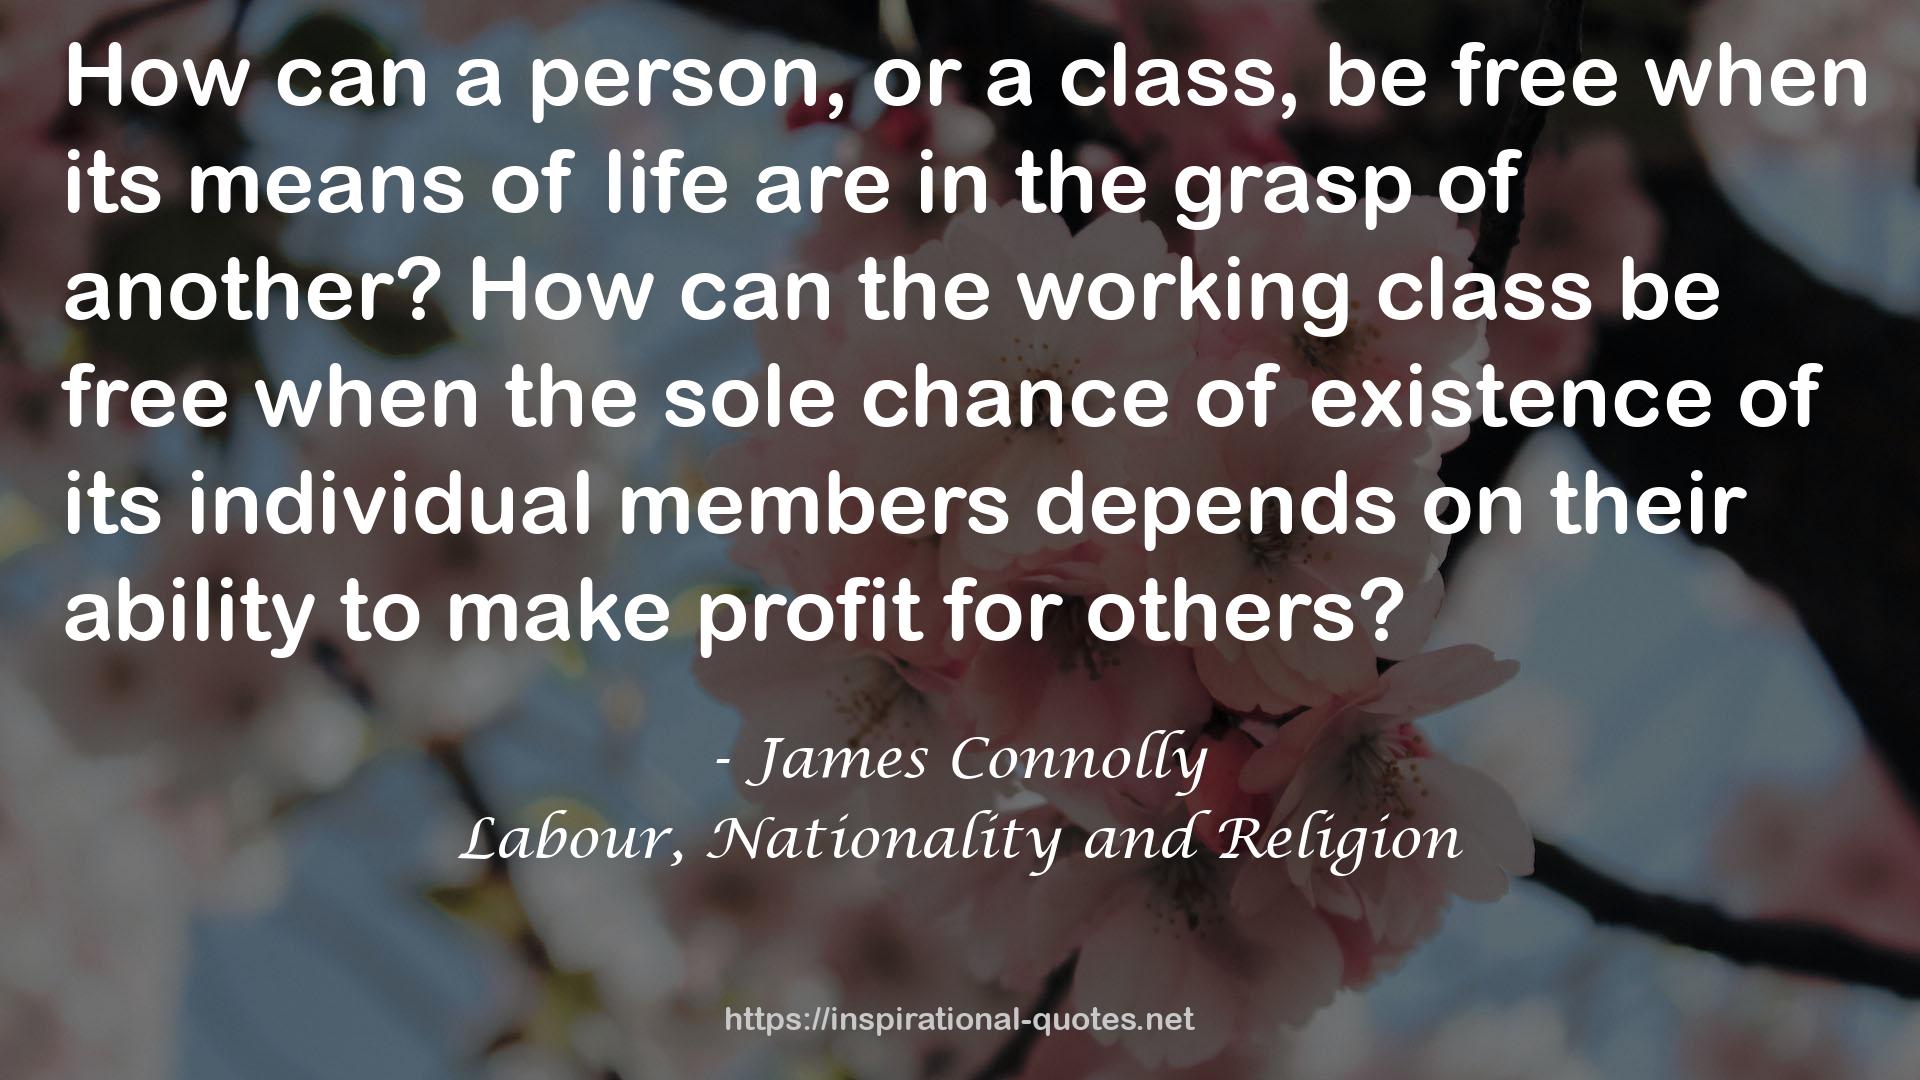 Labour, Nationality and Religion QUOTES